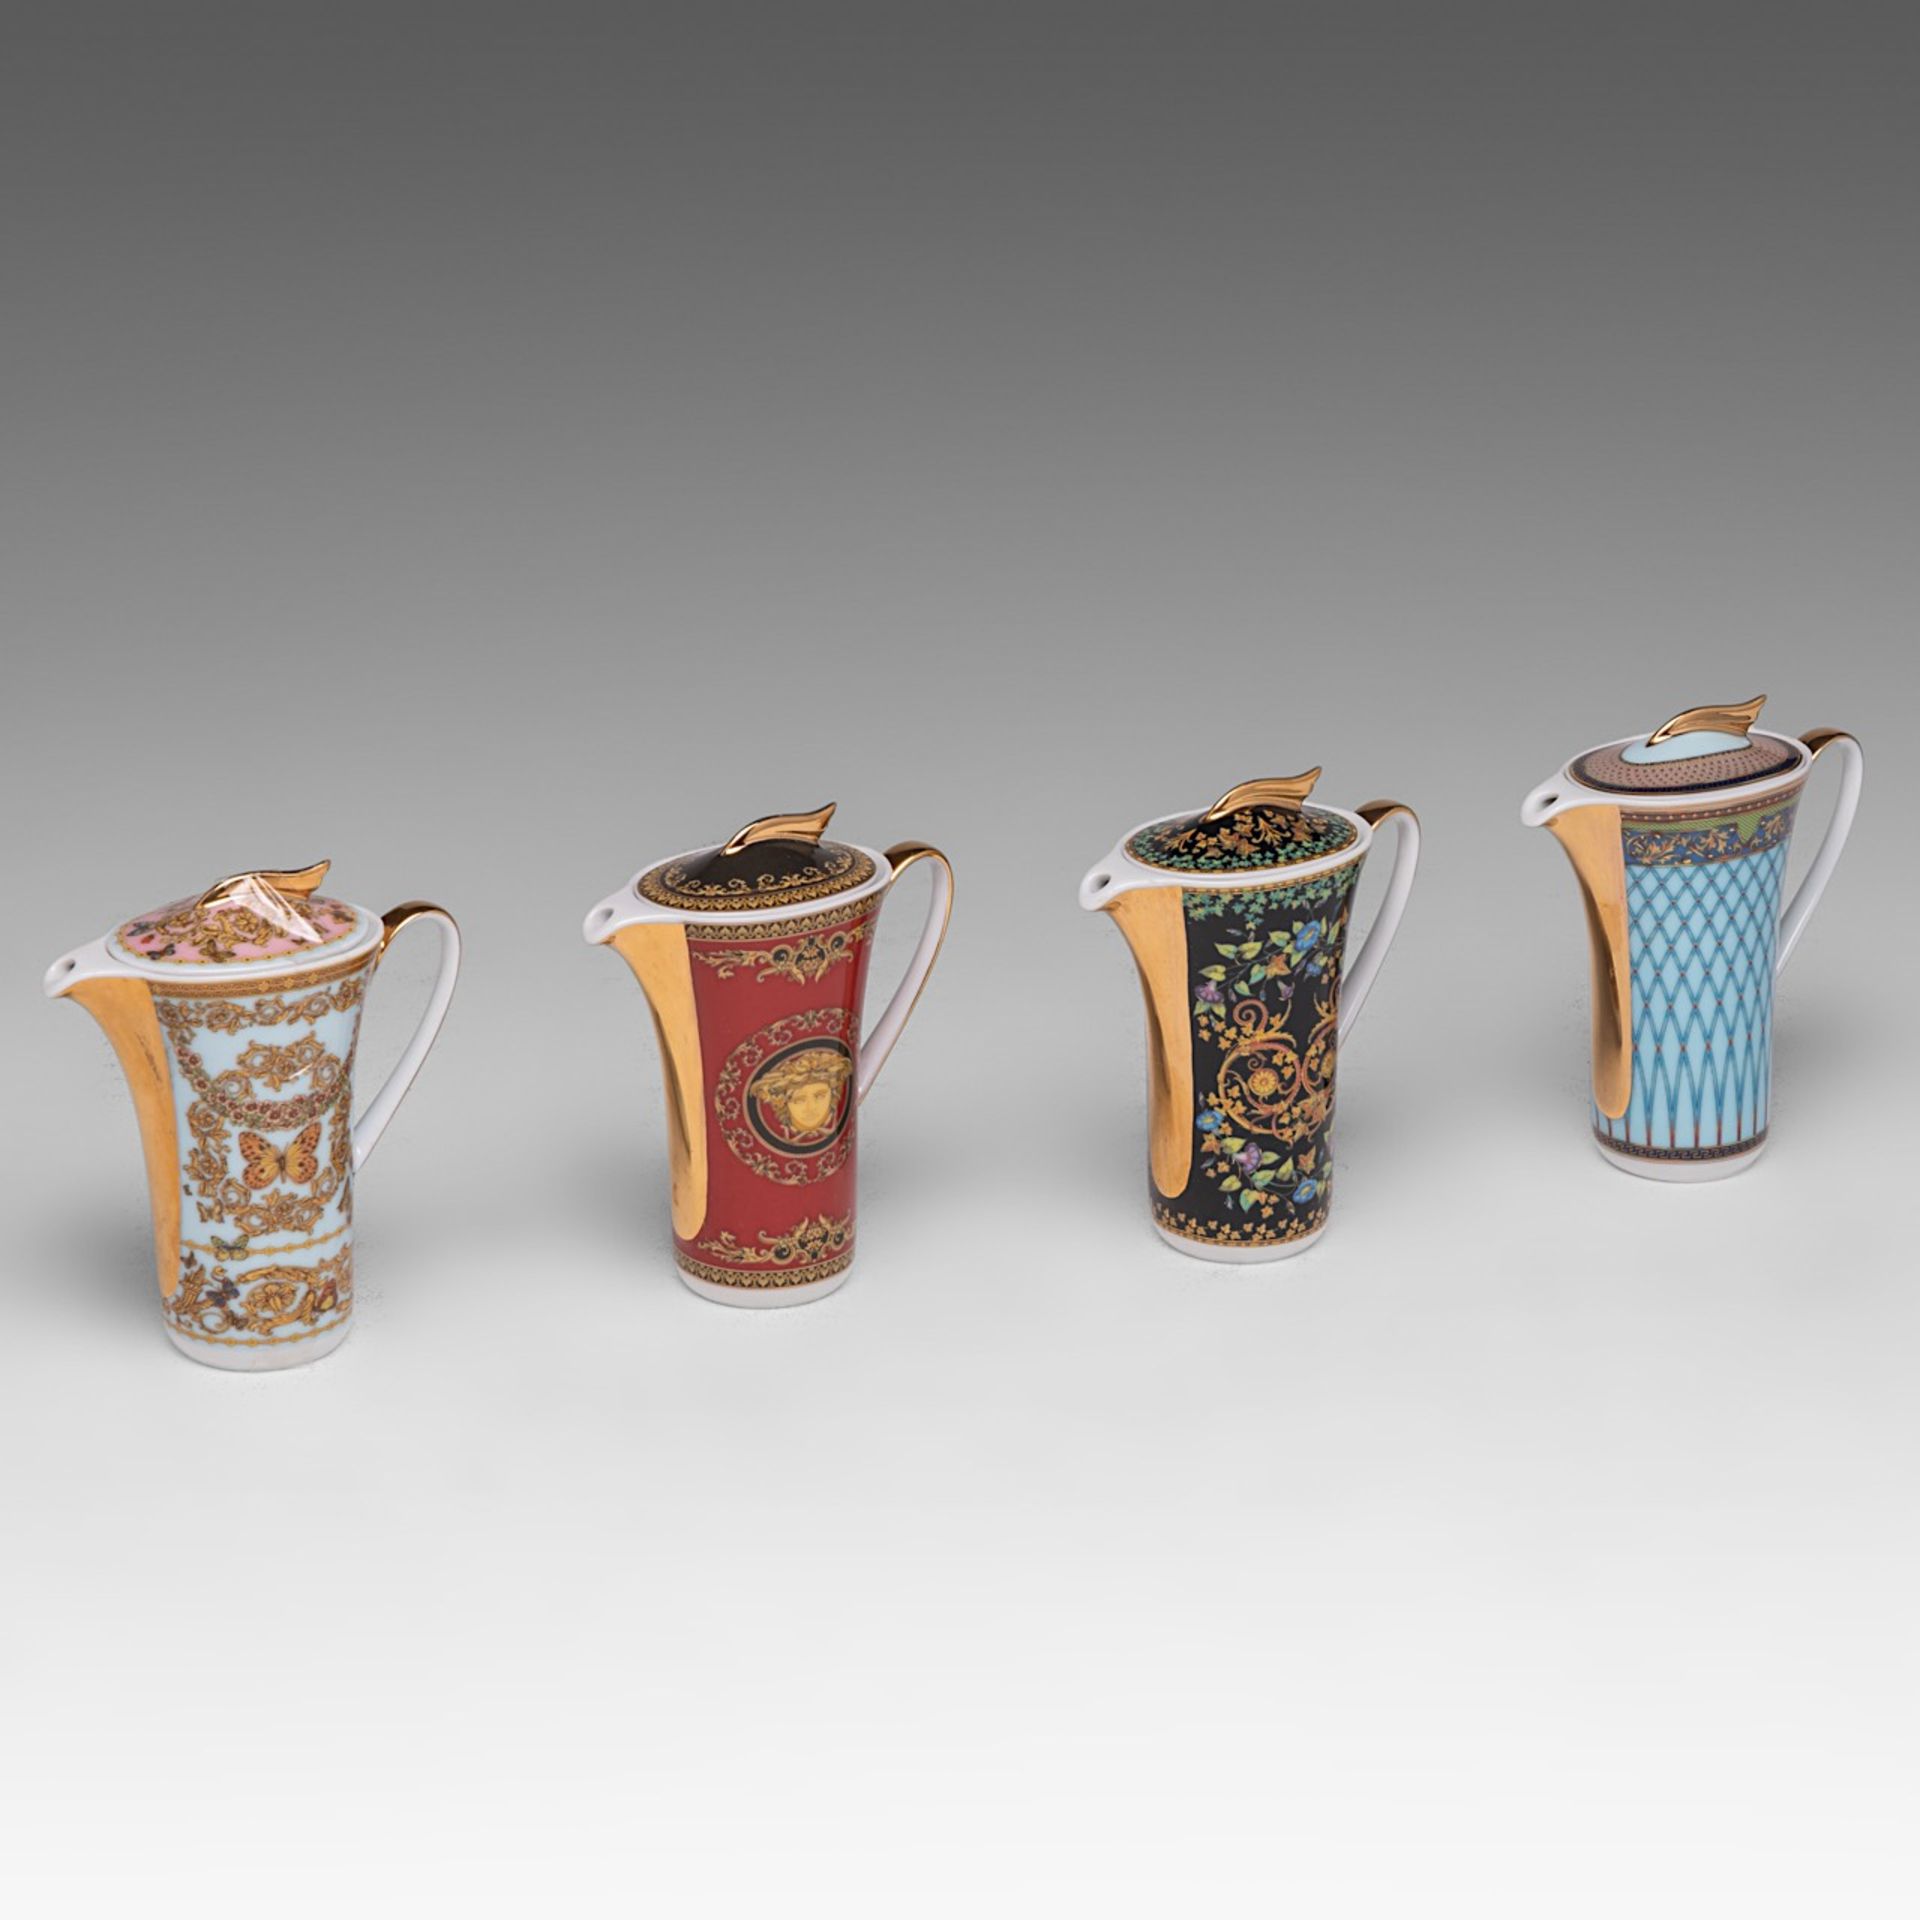 A 68-piece set of Versace 'Ikarus medaillon meandre d'or', porcelain tableware for Rosenthal, added - Image 10 of 11